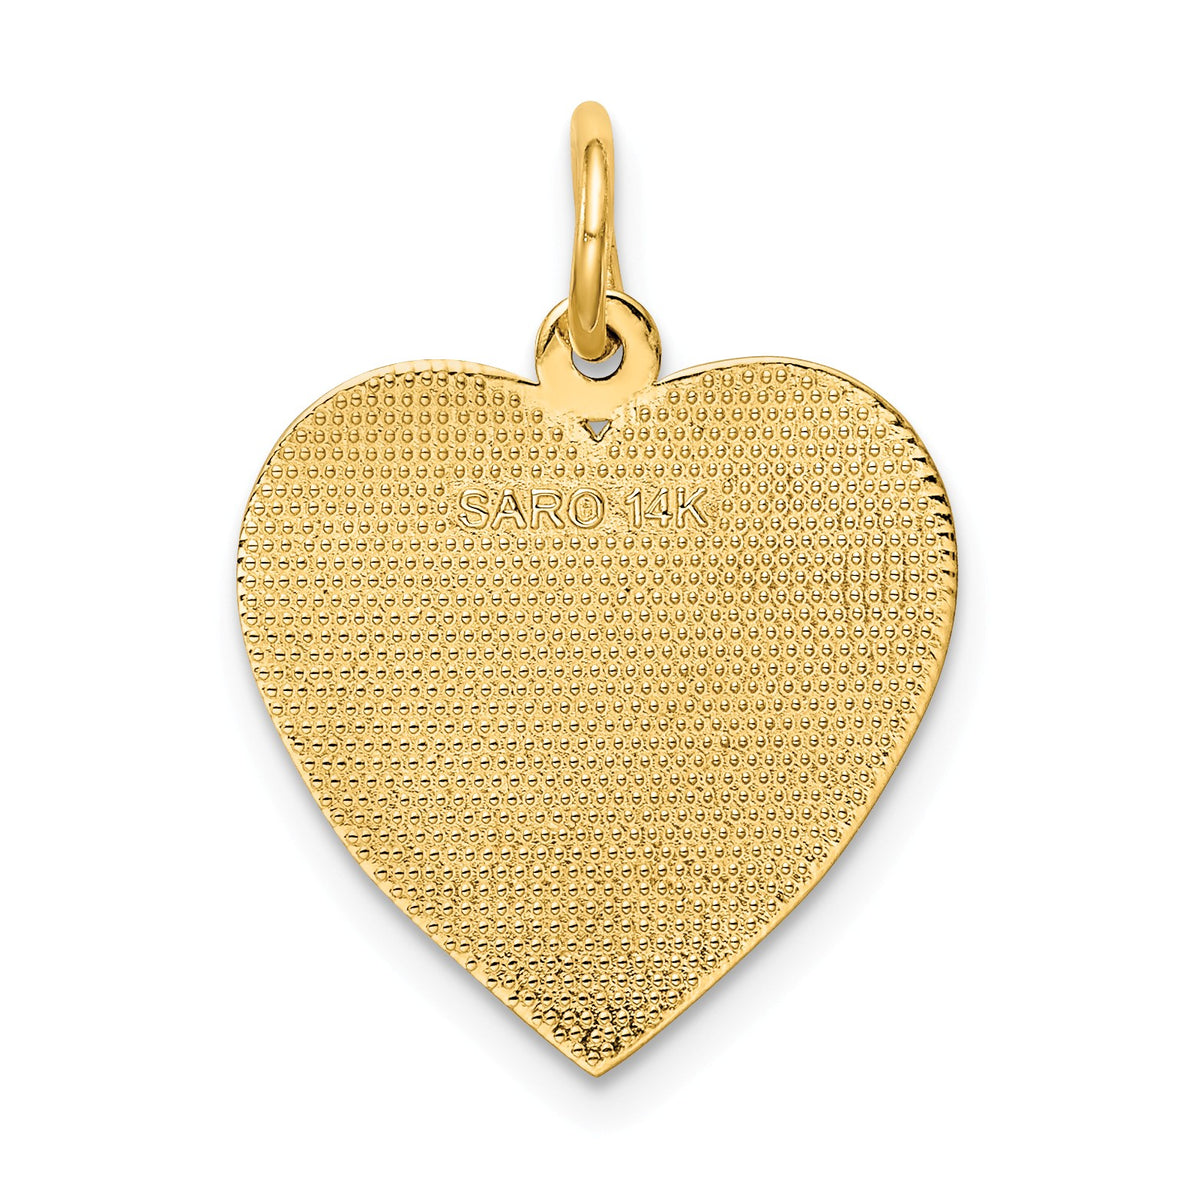 Alternate view of the 14k Yellow Gold Grandma Heart with Flowers Charm or Pendant, 16mm by The Black Bow Jewelry Co.